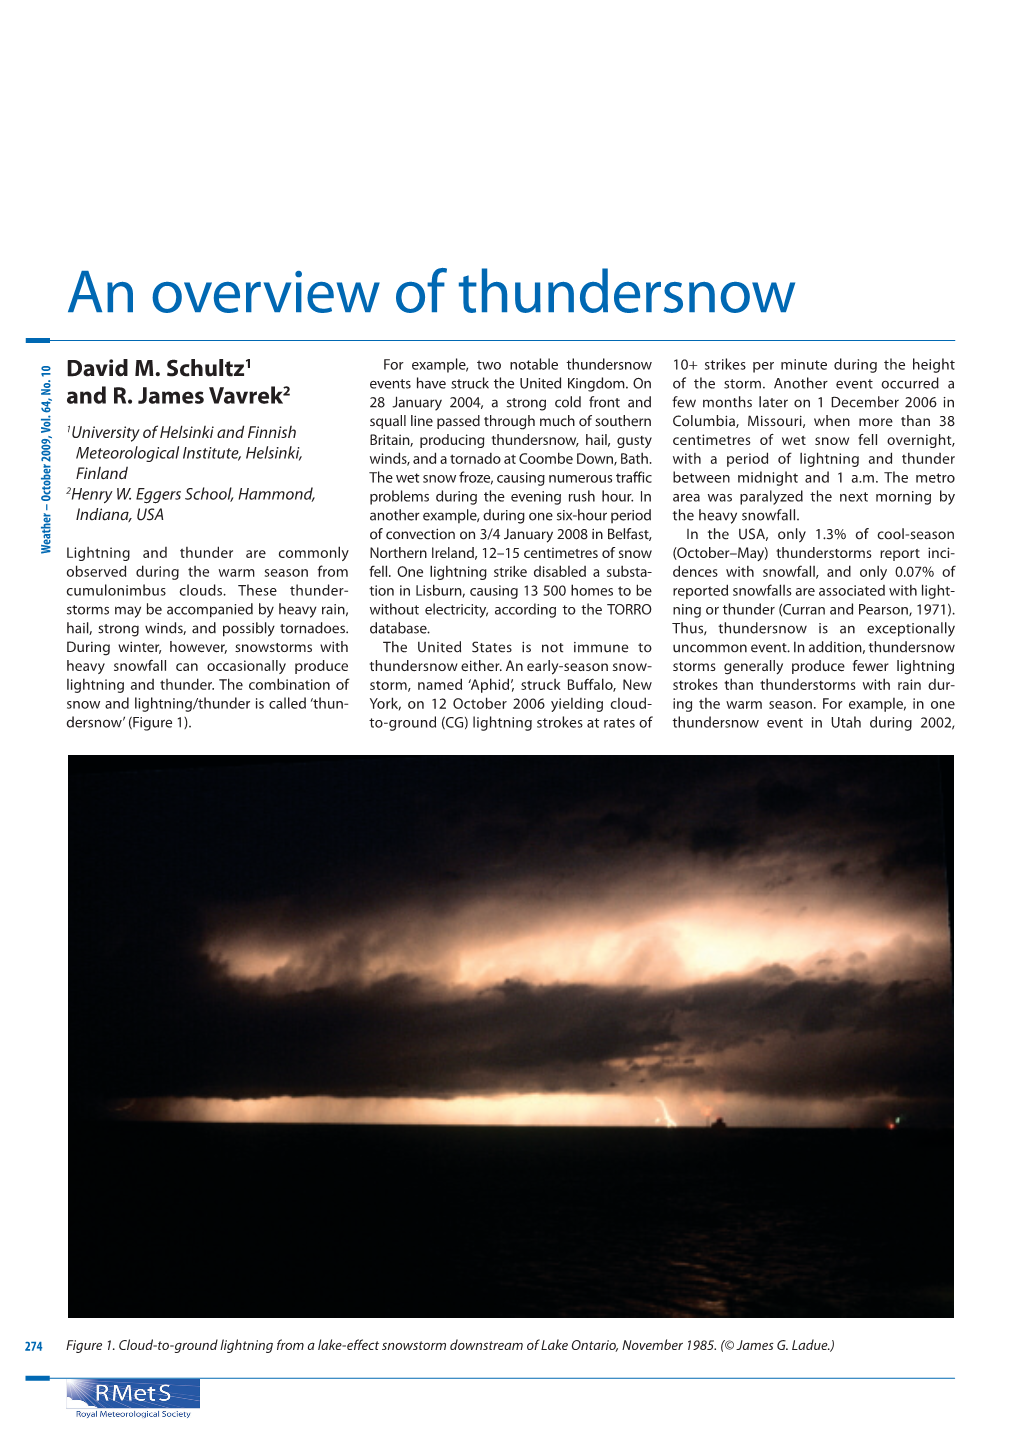 An Overview of Thundersnow